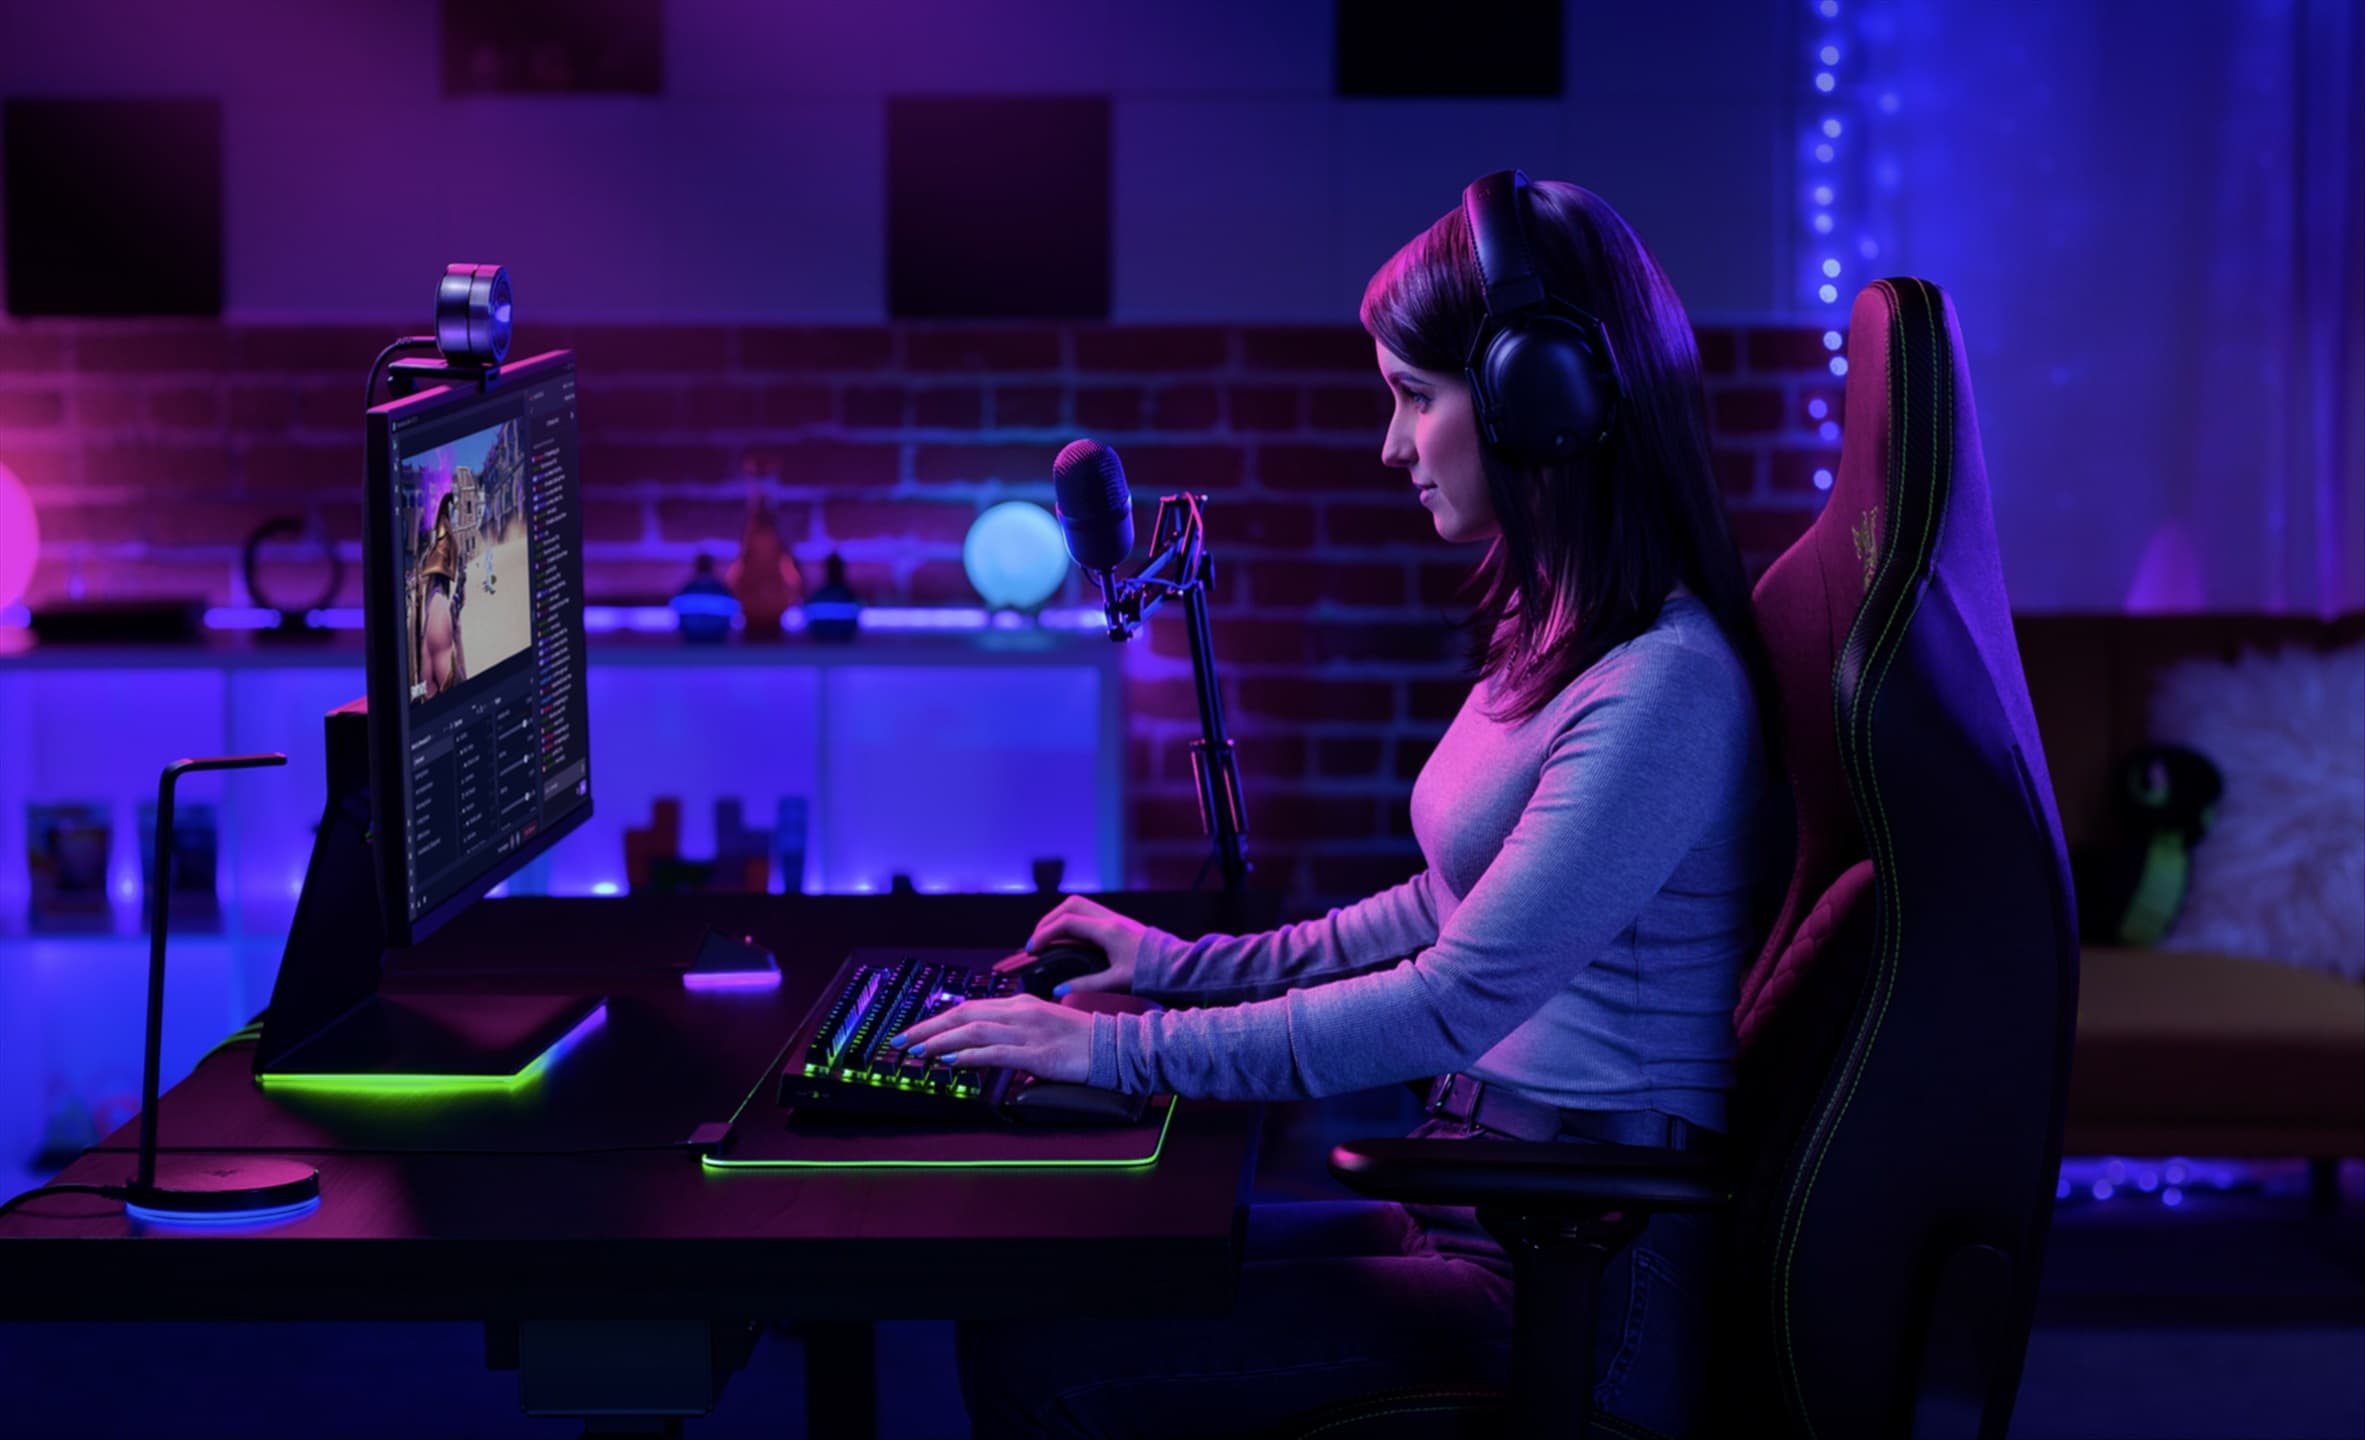 Level up your video conferencing and streaming quality in low light with the new Razer Kiyo Pro